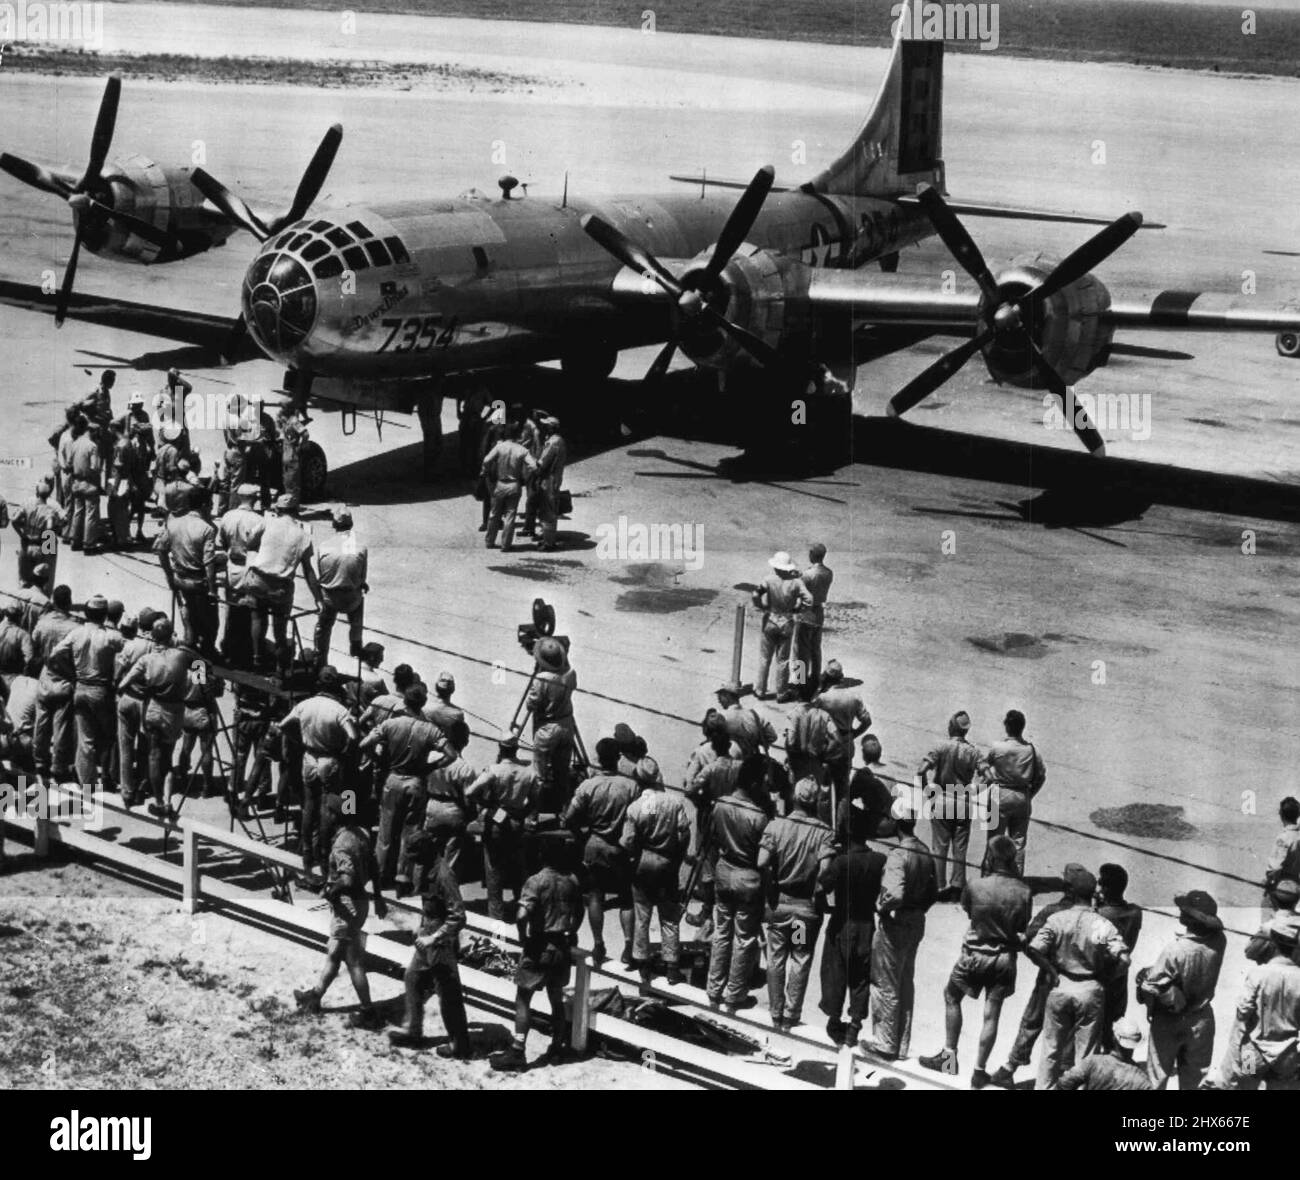 Atomic Bombing Plane Returns To Base After Blast -- Base personnel welcomes the B-29, 'Dave's Dream,' as it returns to the field at Kwajalein July 1 after dropping an atomic Bomb over a 'sitting duck' naval fleet at Bikini during joint U.S. Army-Navy test. No Identification of persons in picture is available. This is third original, picture on bomb test released it Washington. July 4, 1946. (Photo by AP Wirephoto). Stock Photo